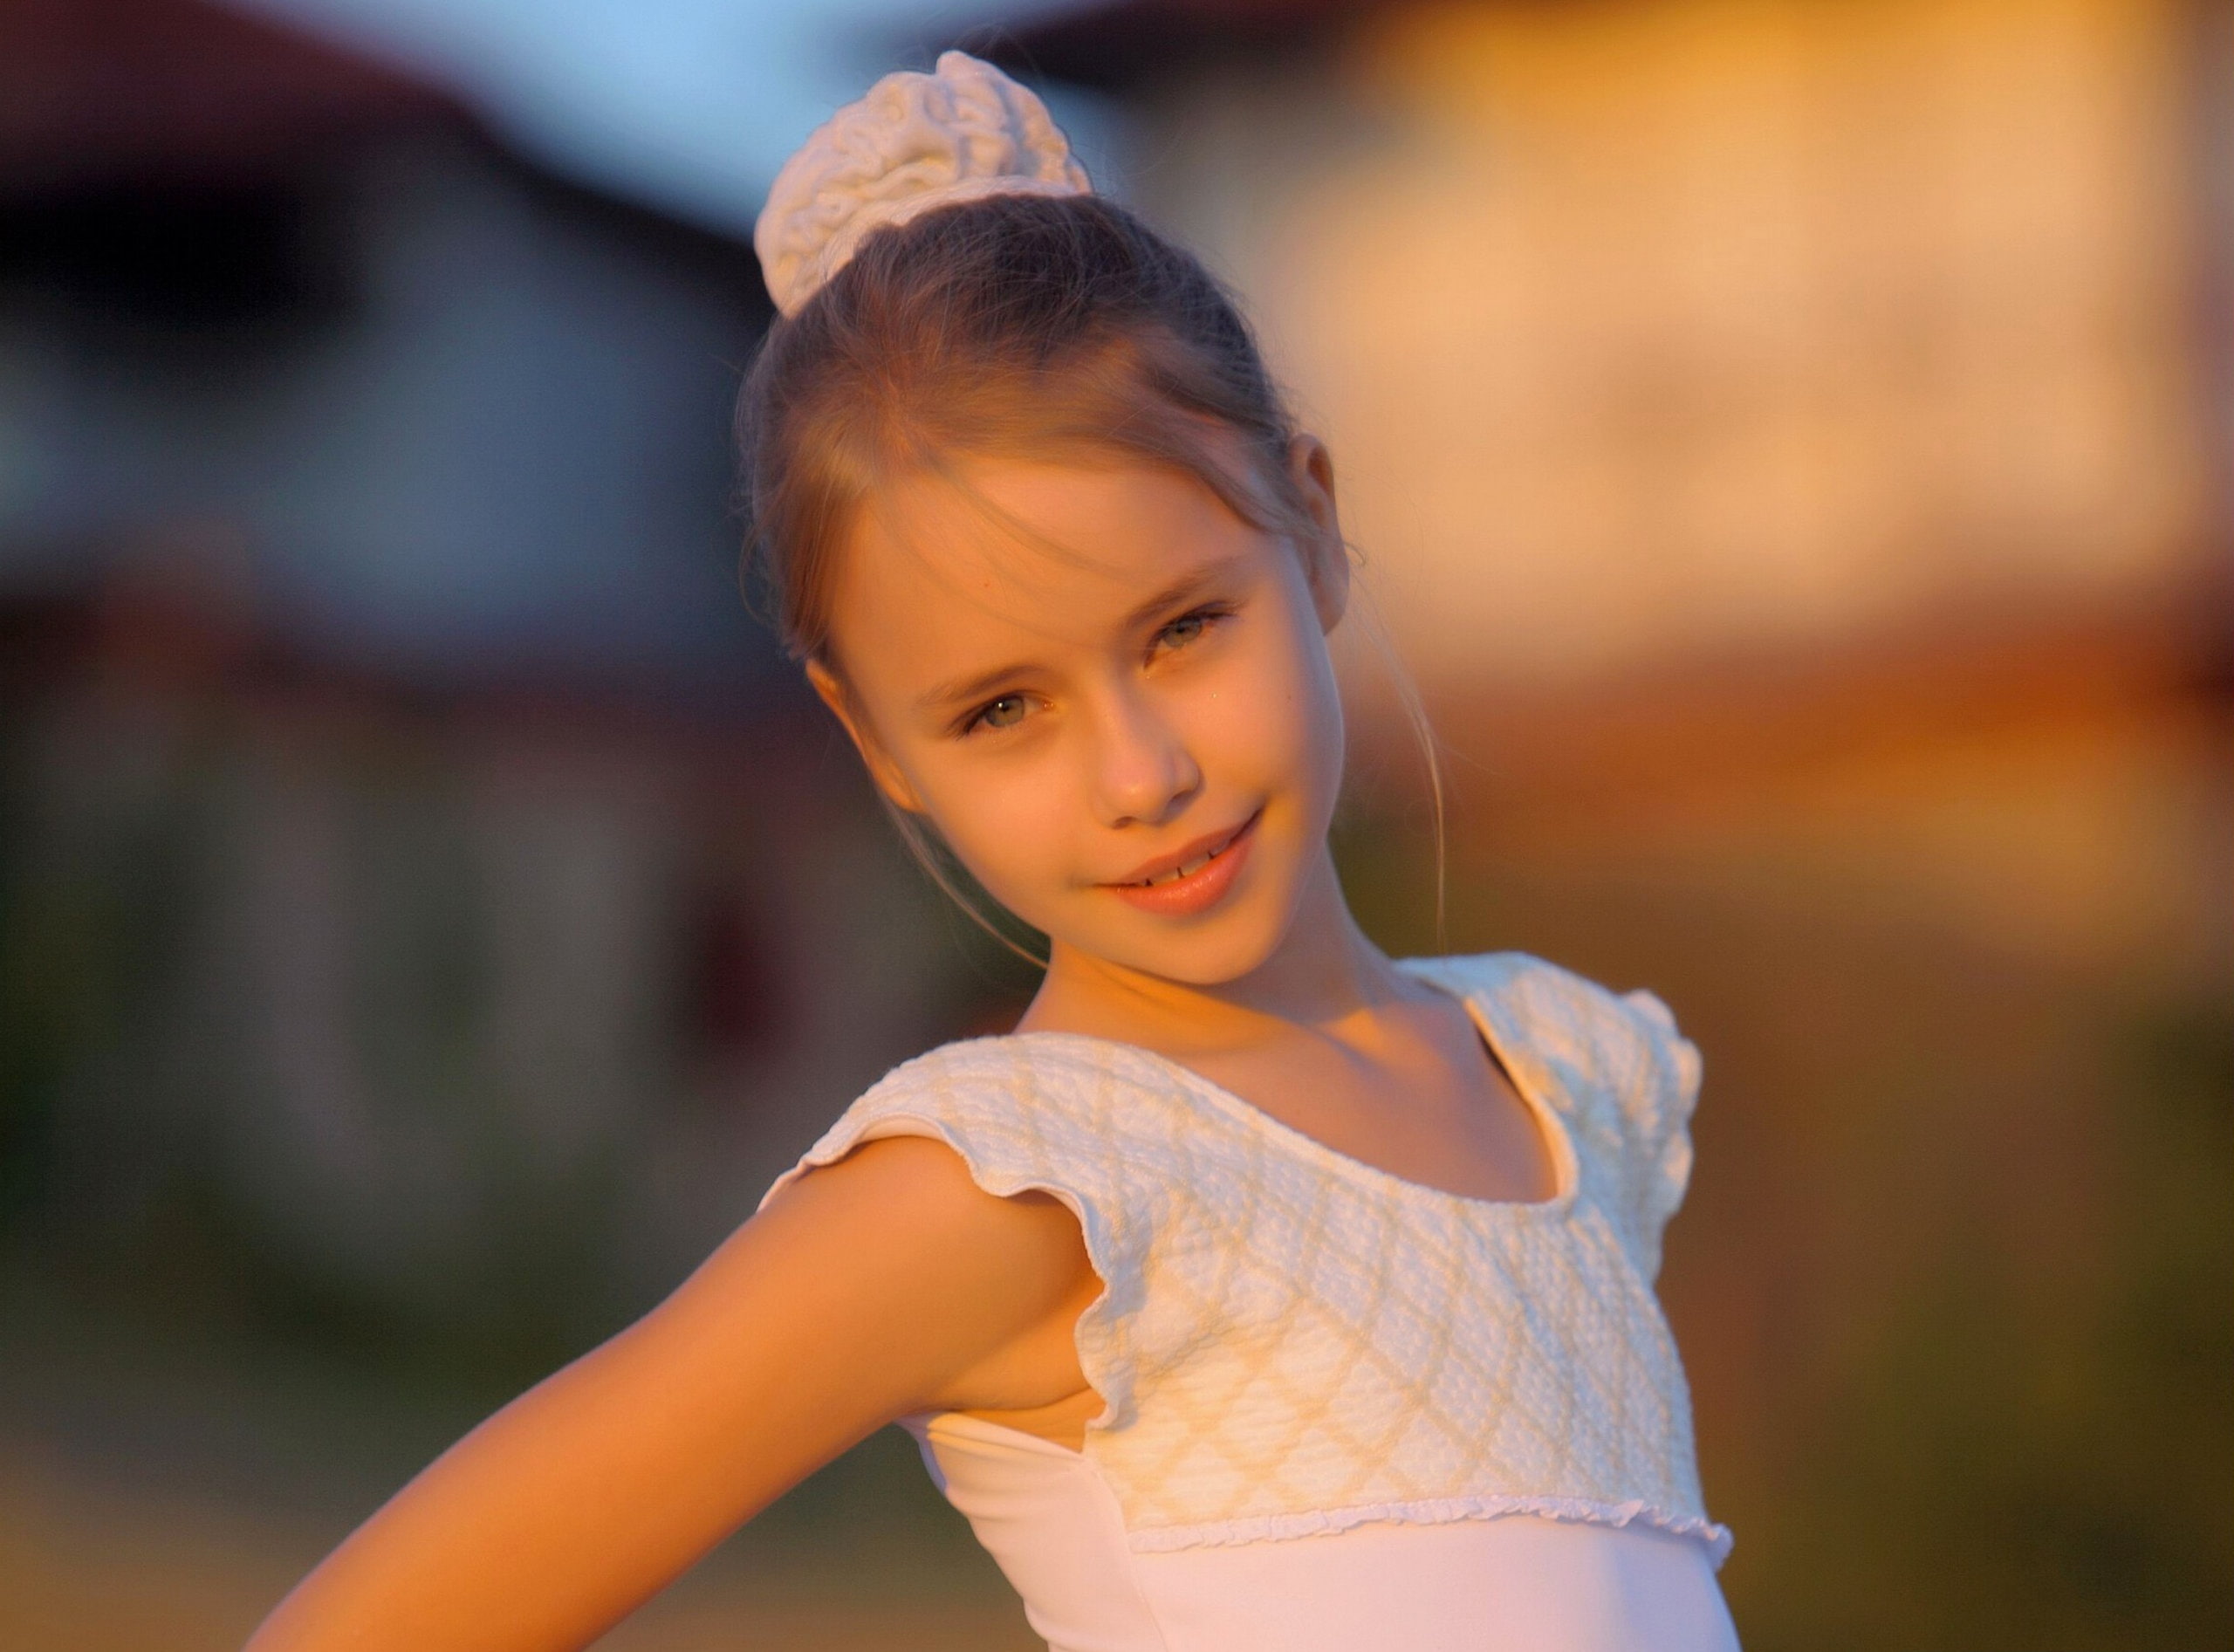 Hanna Portrait at Sunset, girl's white and pink sleeveless top